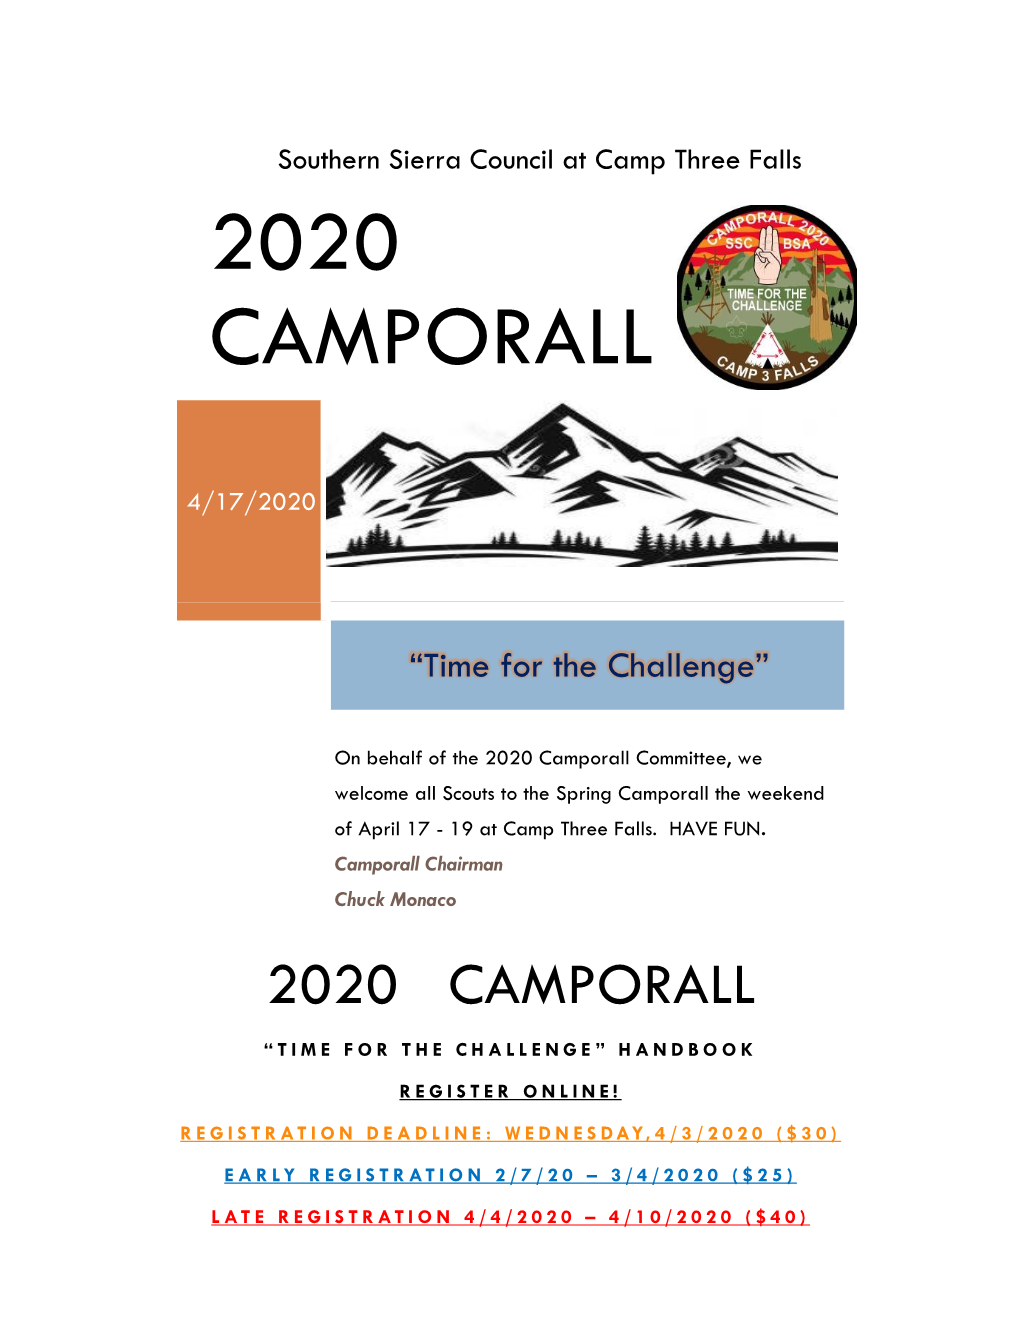 2020 Camporall